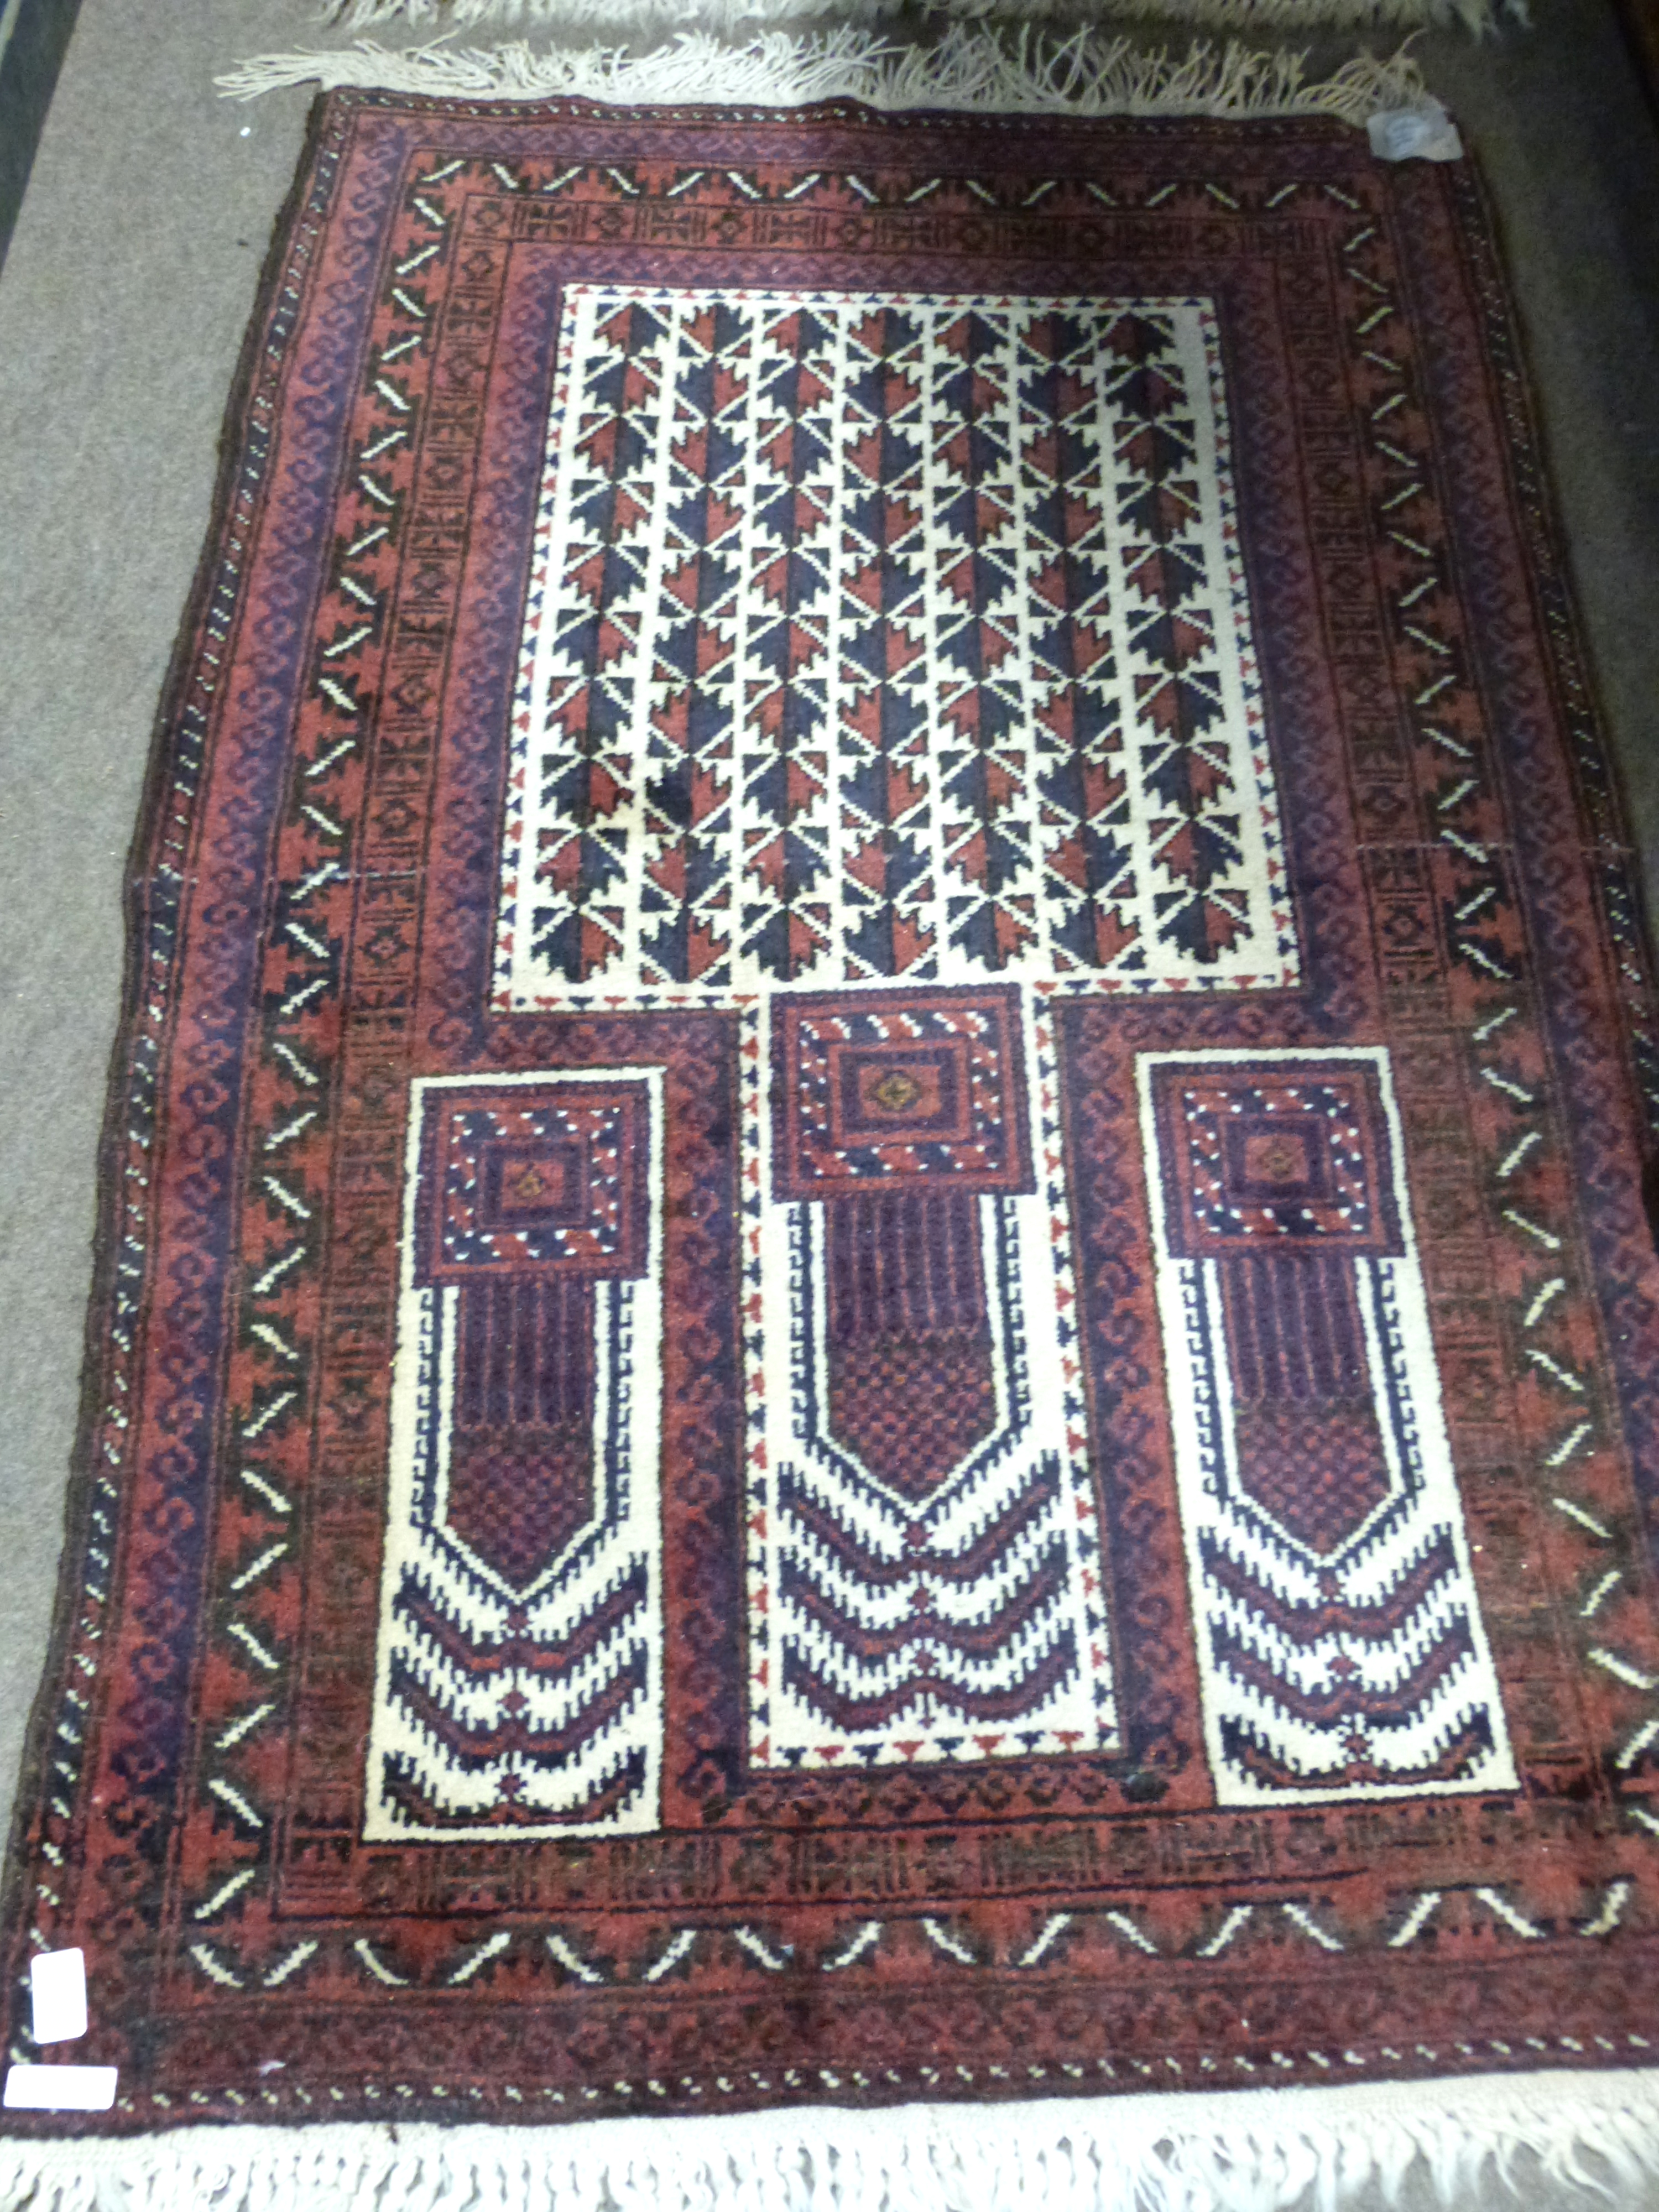 Iranian wool prayer rug with geometric patterns in blue and beige to a dark red ground, 144 x 80cm